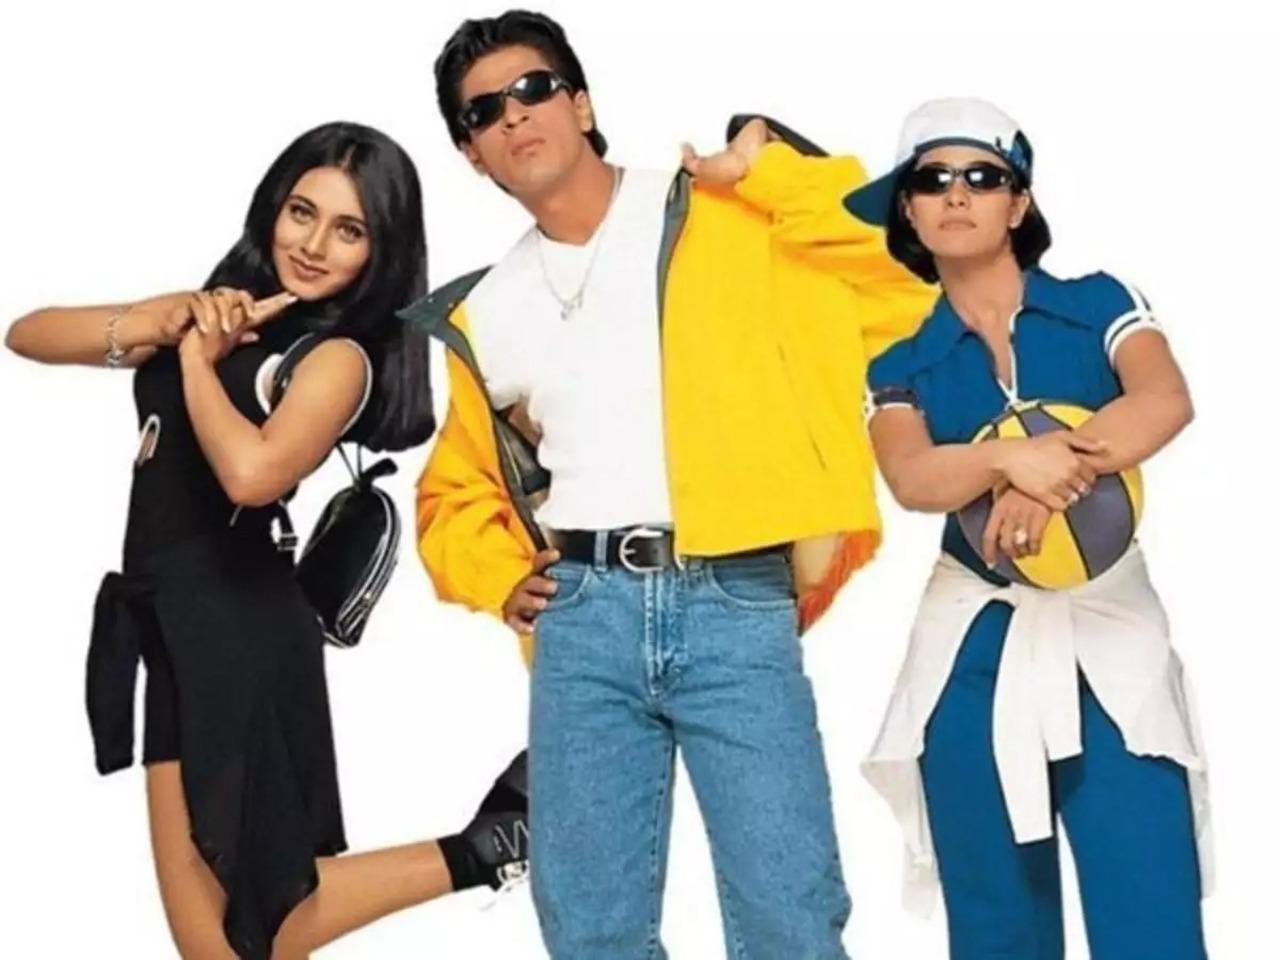 Kuch Kuch Hota Hai (1998) 
Pyaar dosti hai, said Rahul (Shah Rukh Khan) in this film directed by Karan Johar. The film portrayed friendship between Rahul and Anjali, Anjali and Tina, Anjali's frienship with her principal and hostel warden. The film also shows the beautiful friendship between little Anjali and Aman (Salman Khan)